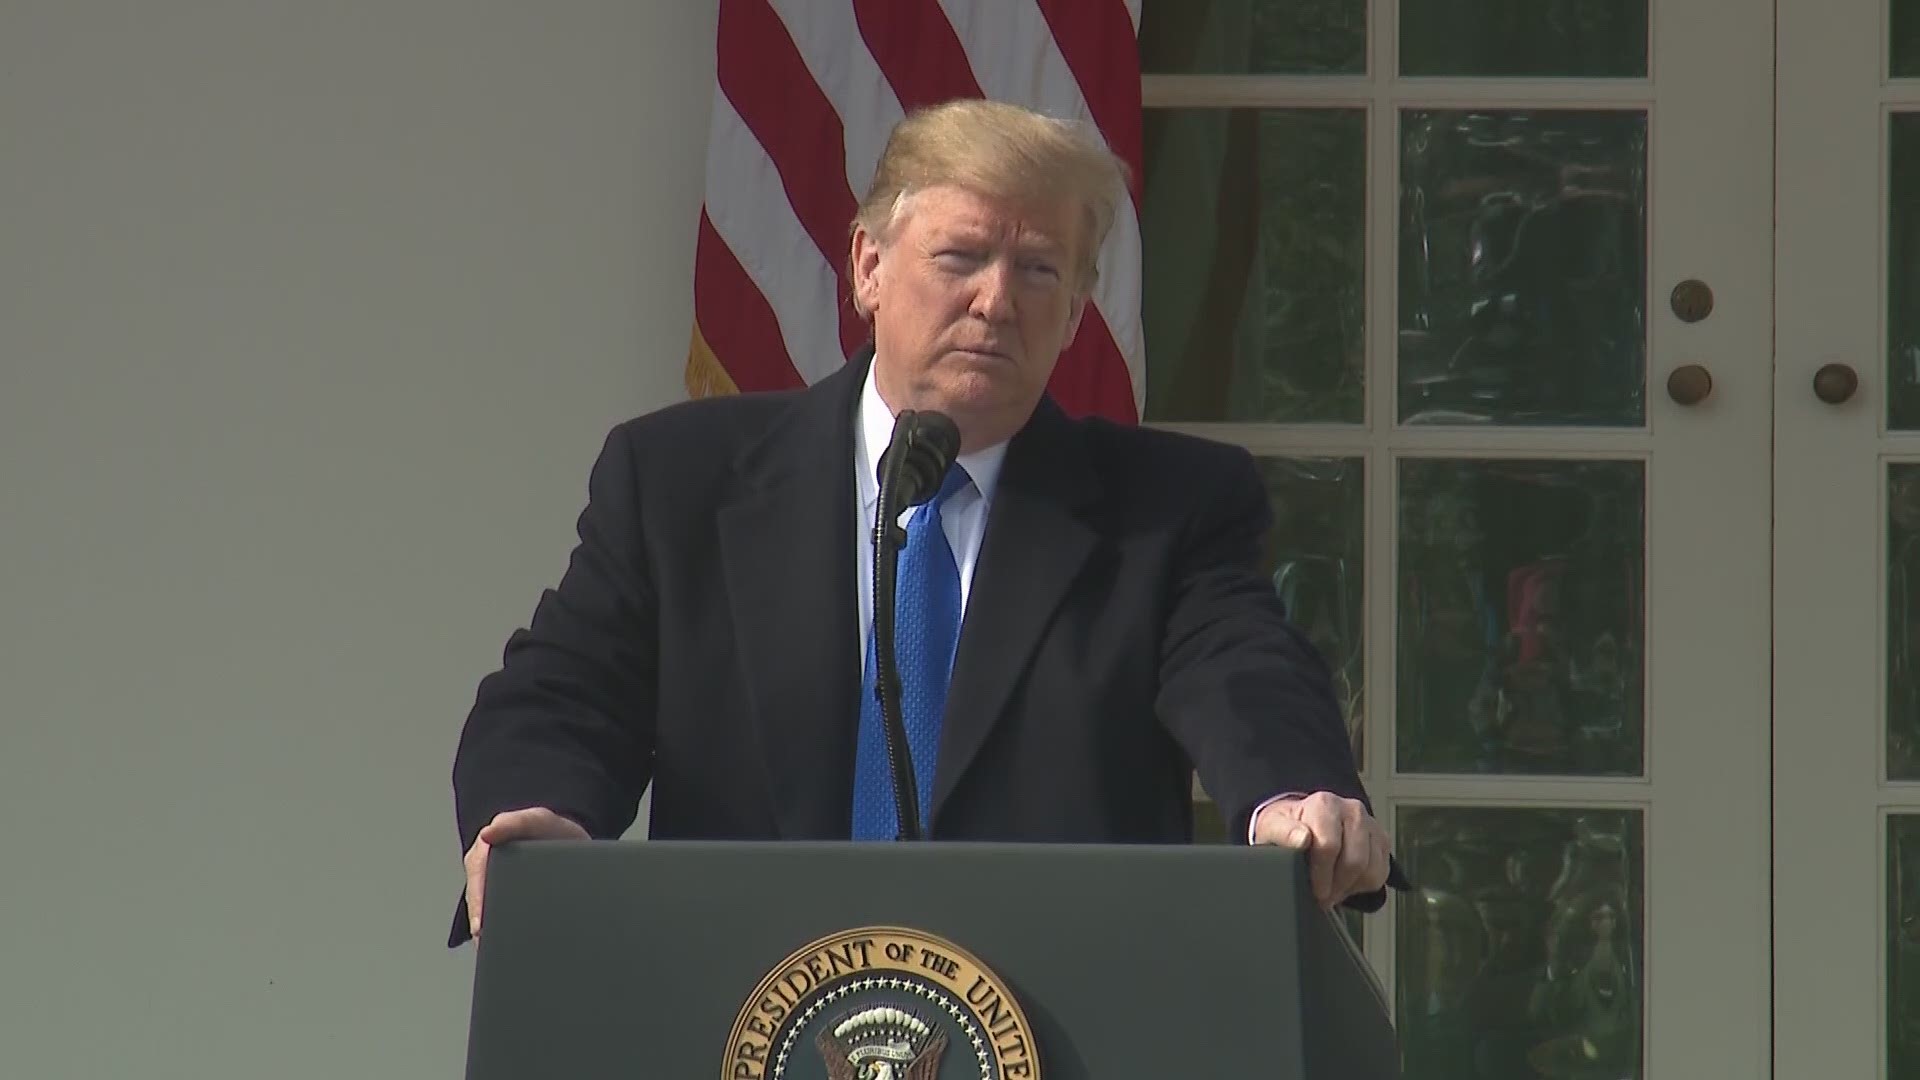 'It's a great thing to do,' President Donald Trump said after declaring a national emergency.